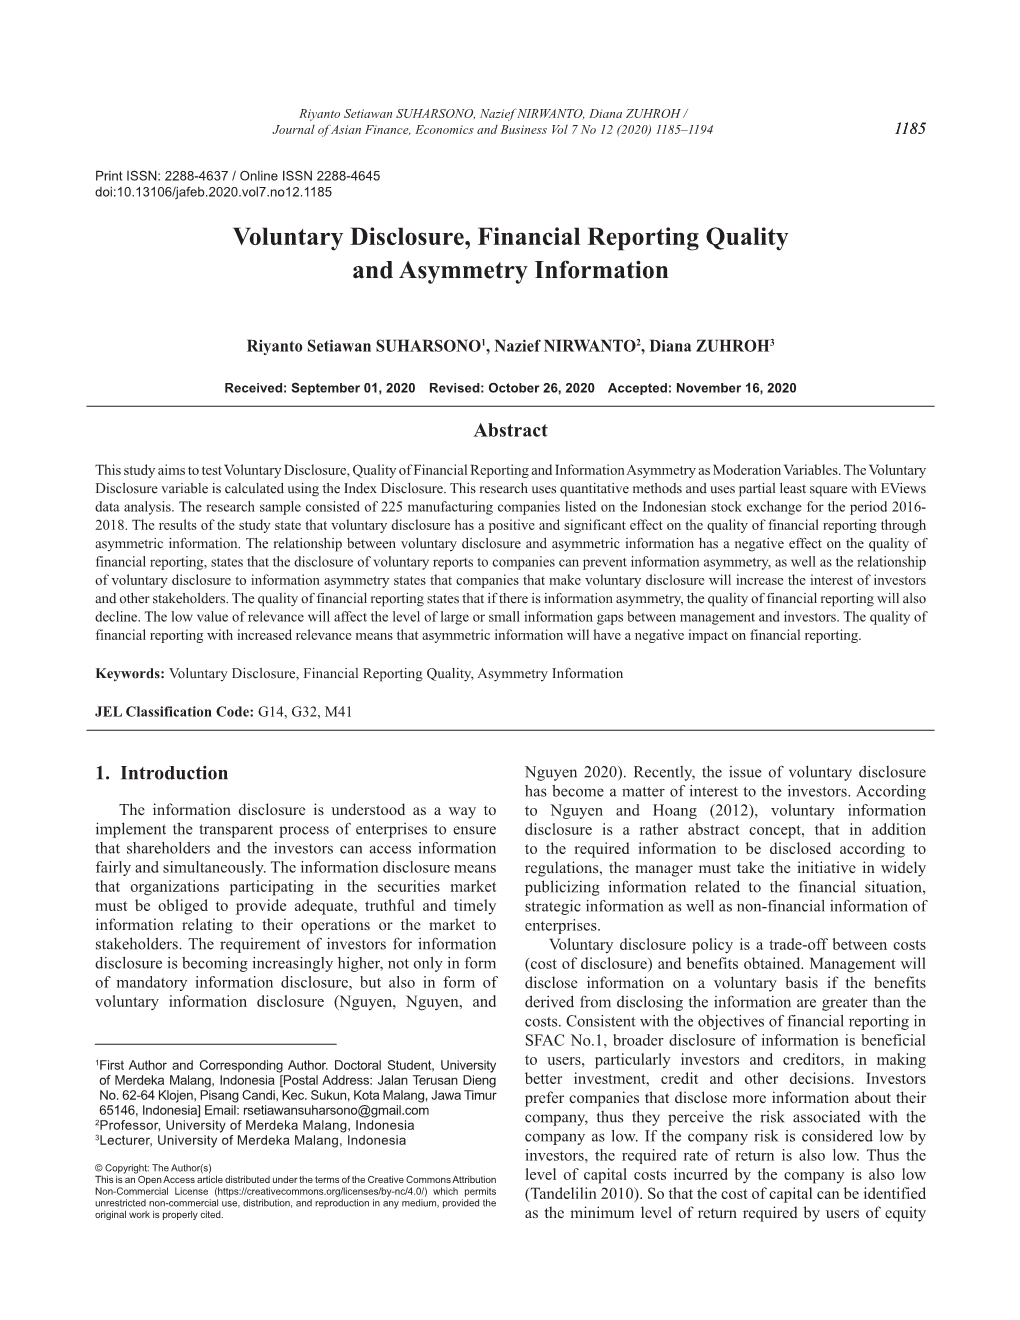 Voluntary Disclosure, Financial Reporting Quality and Asymmetry Information